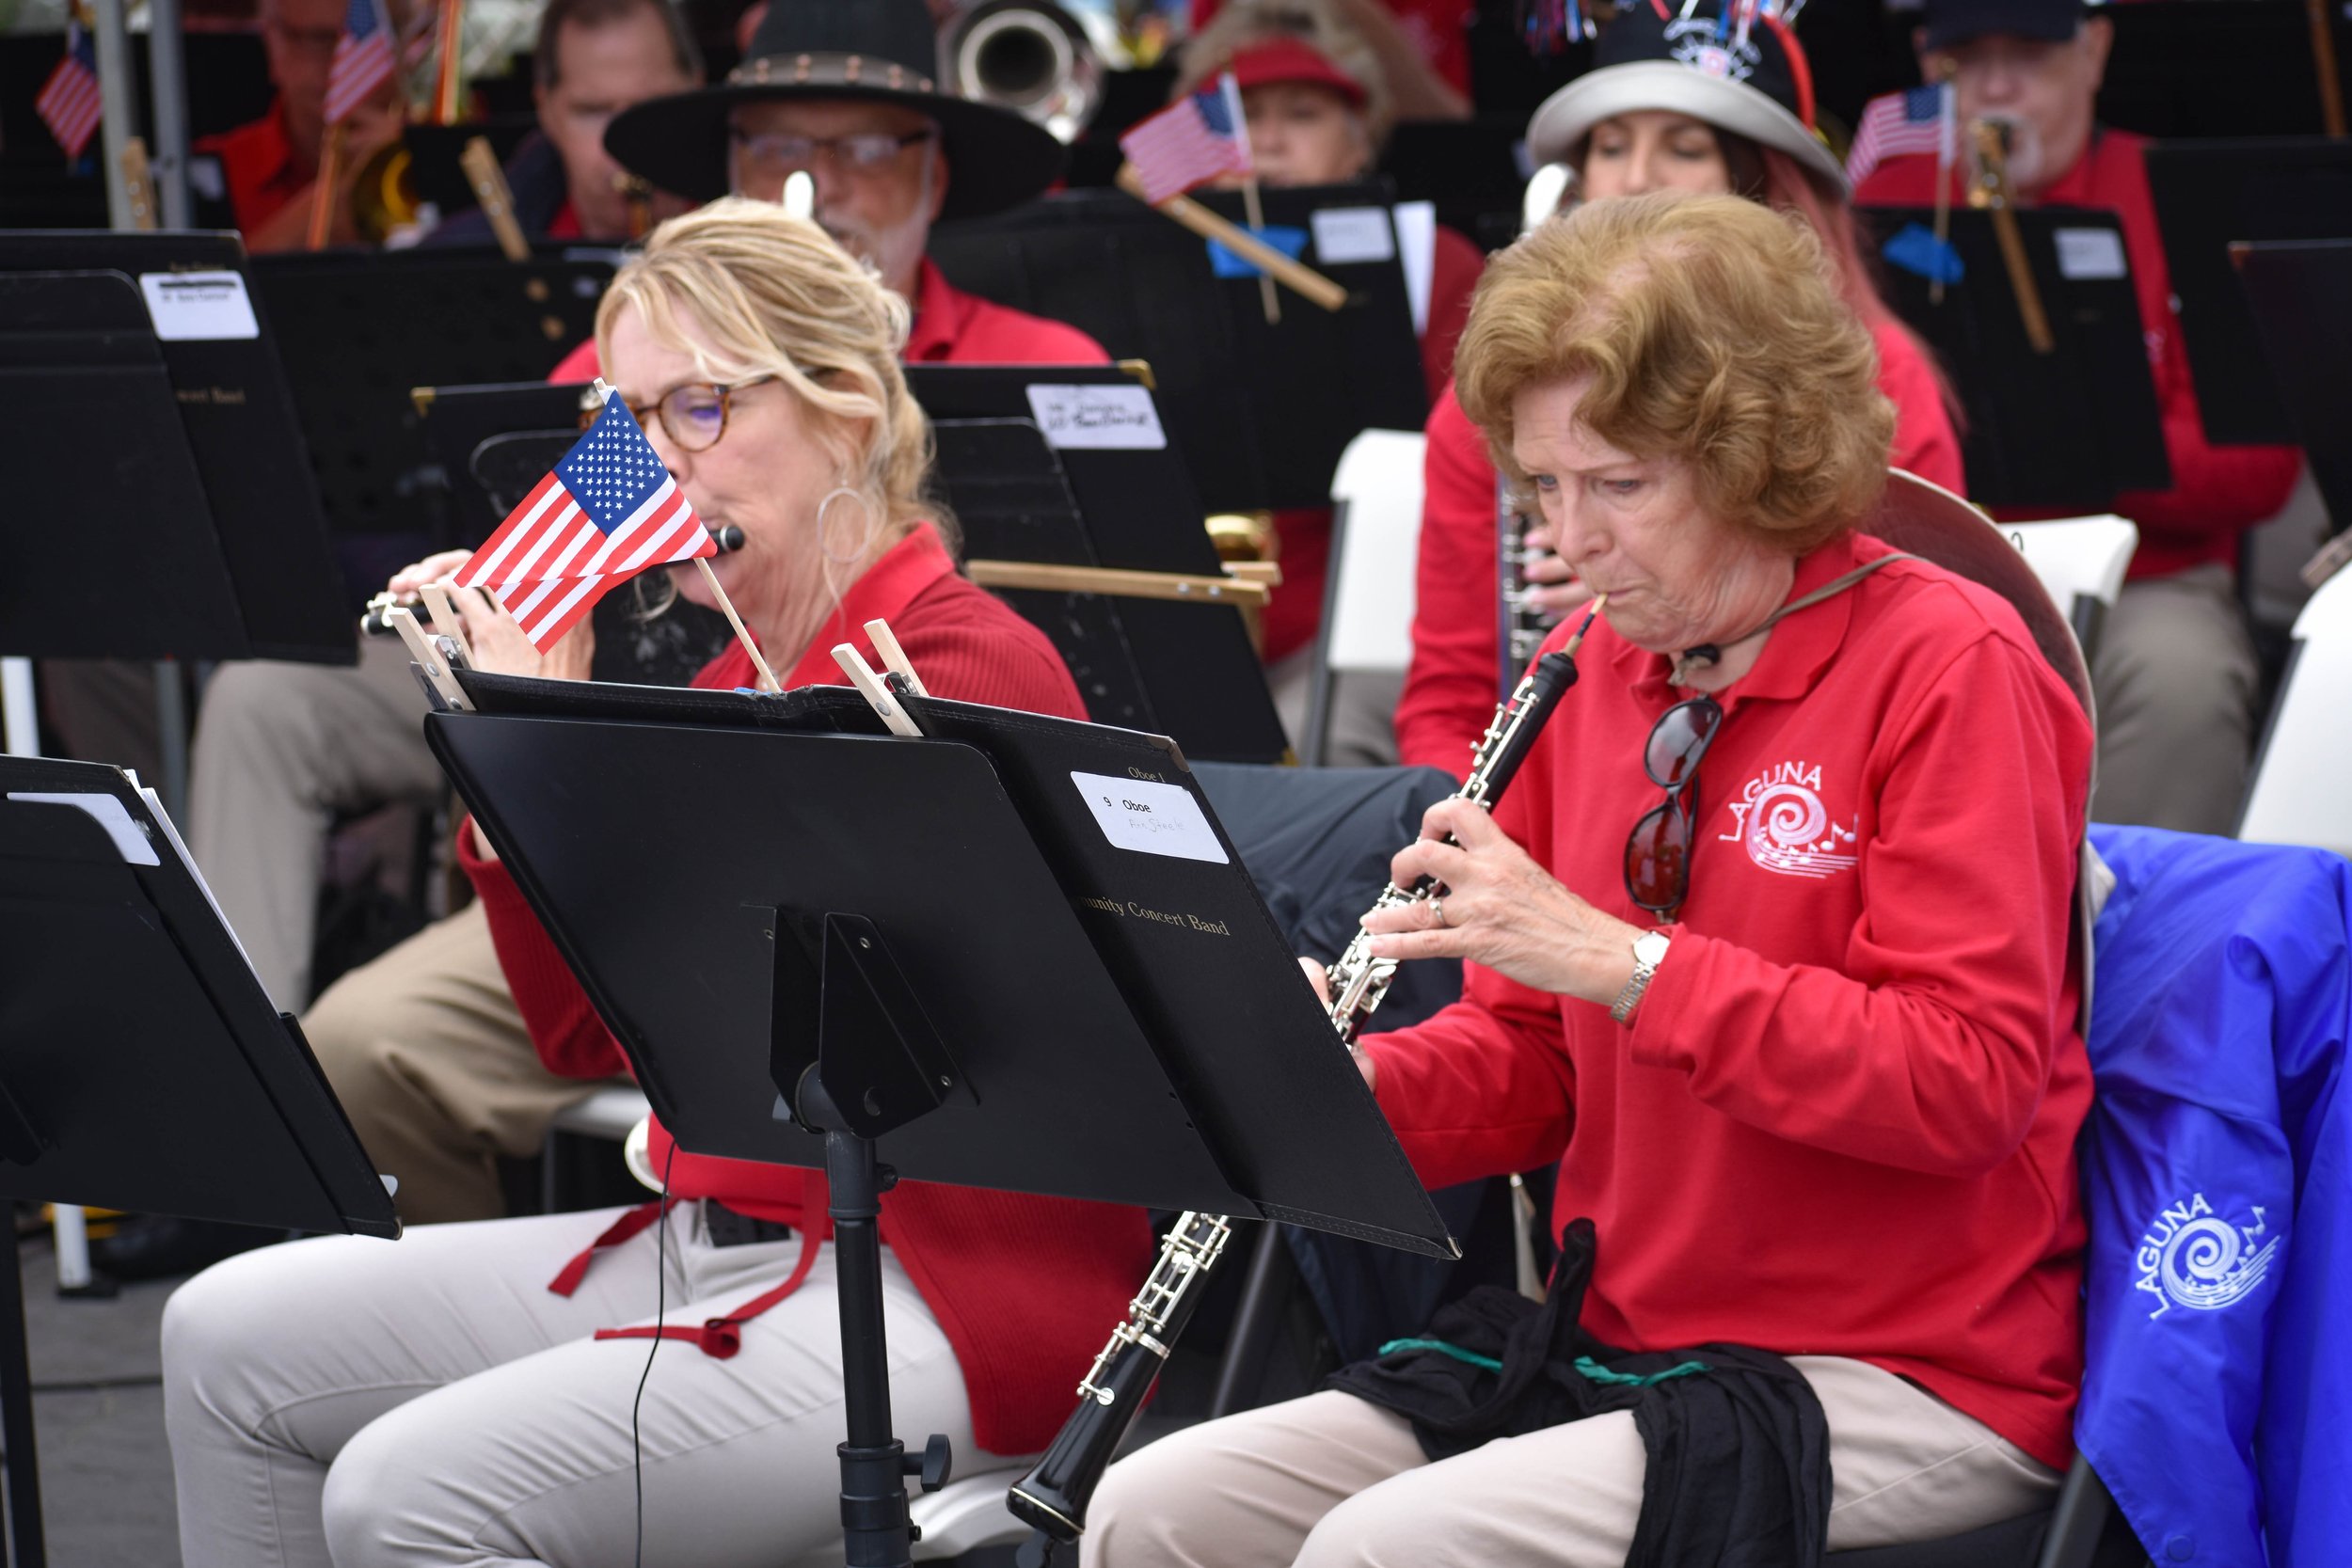 05-29-2023 LCCB and Jazz Band Memorial Day Concerts by Peyton Webster2-44.jpg